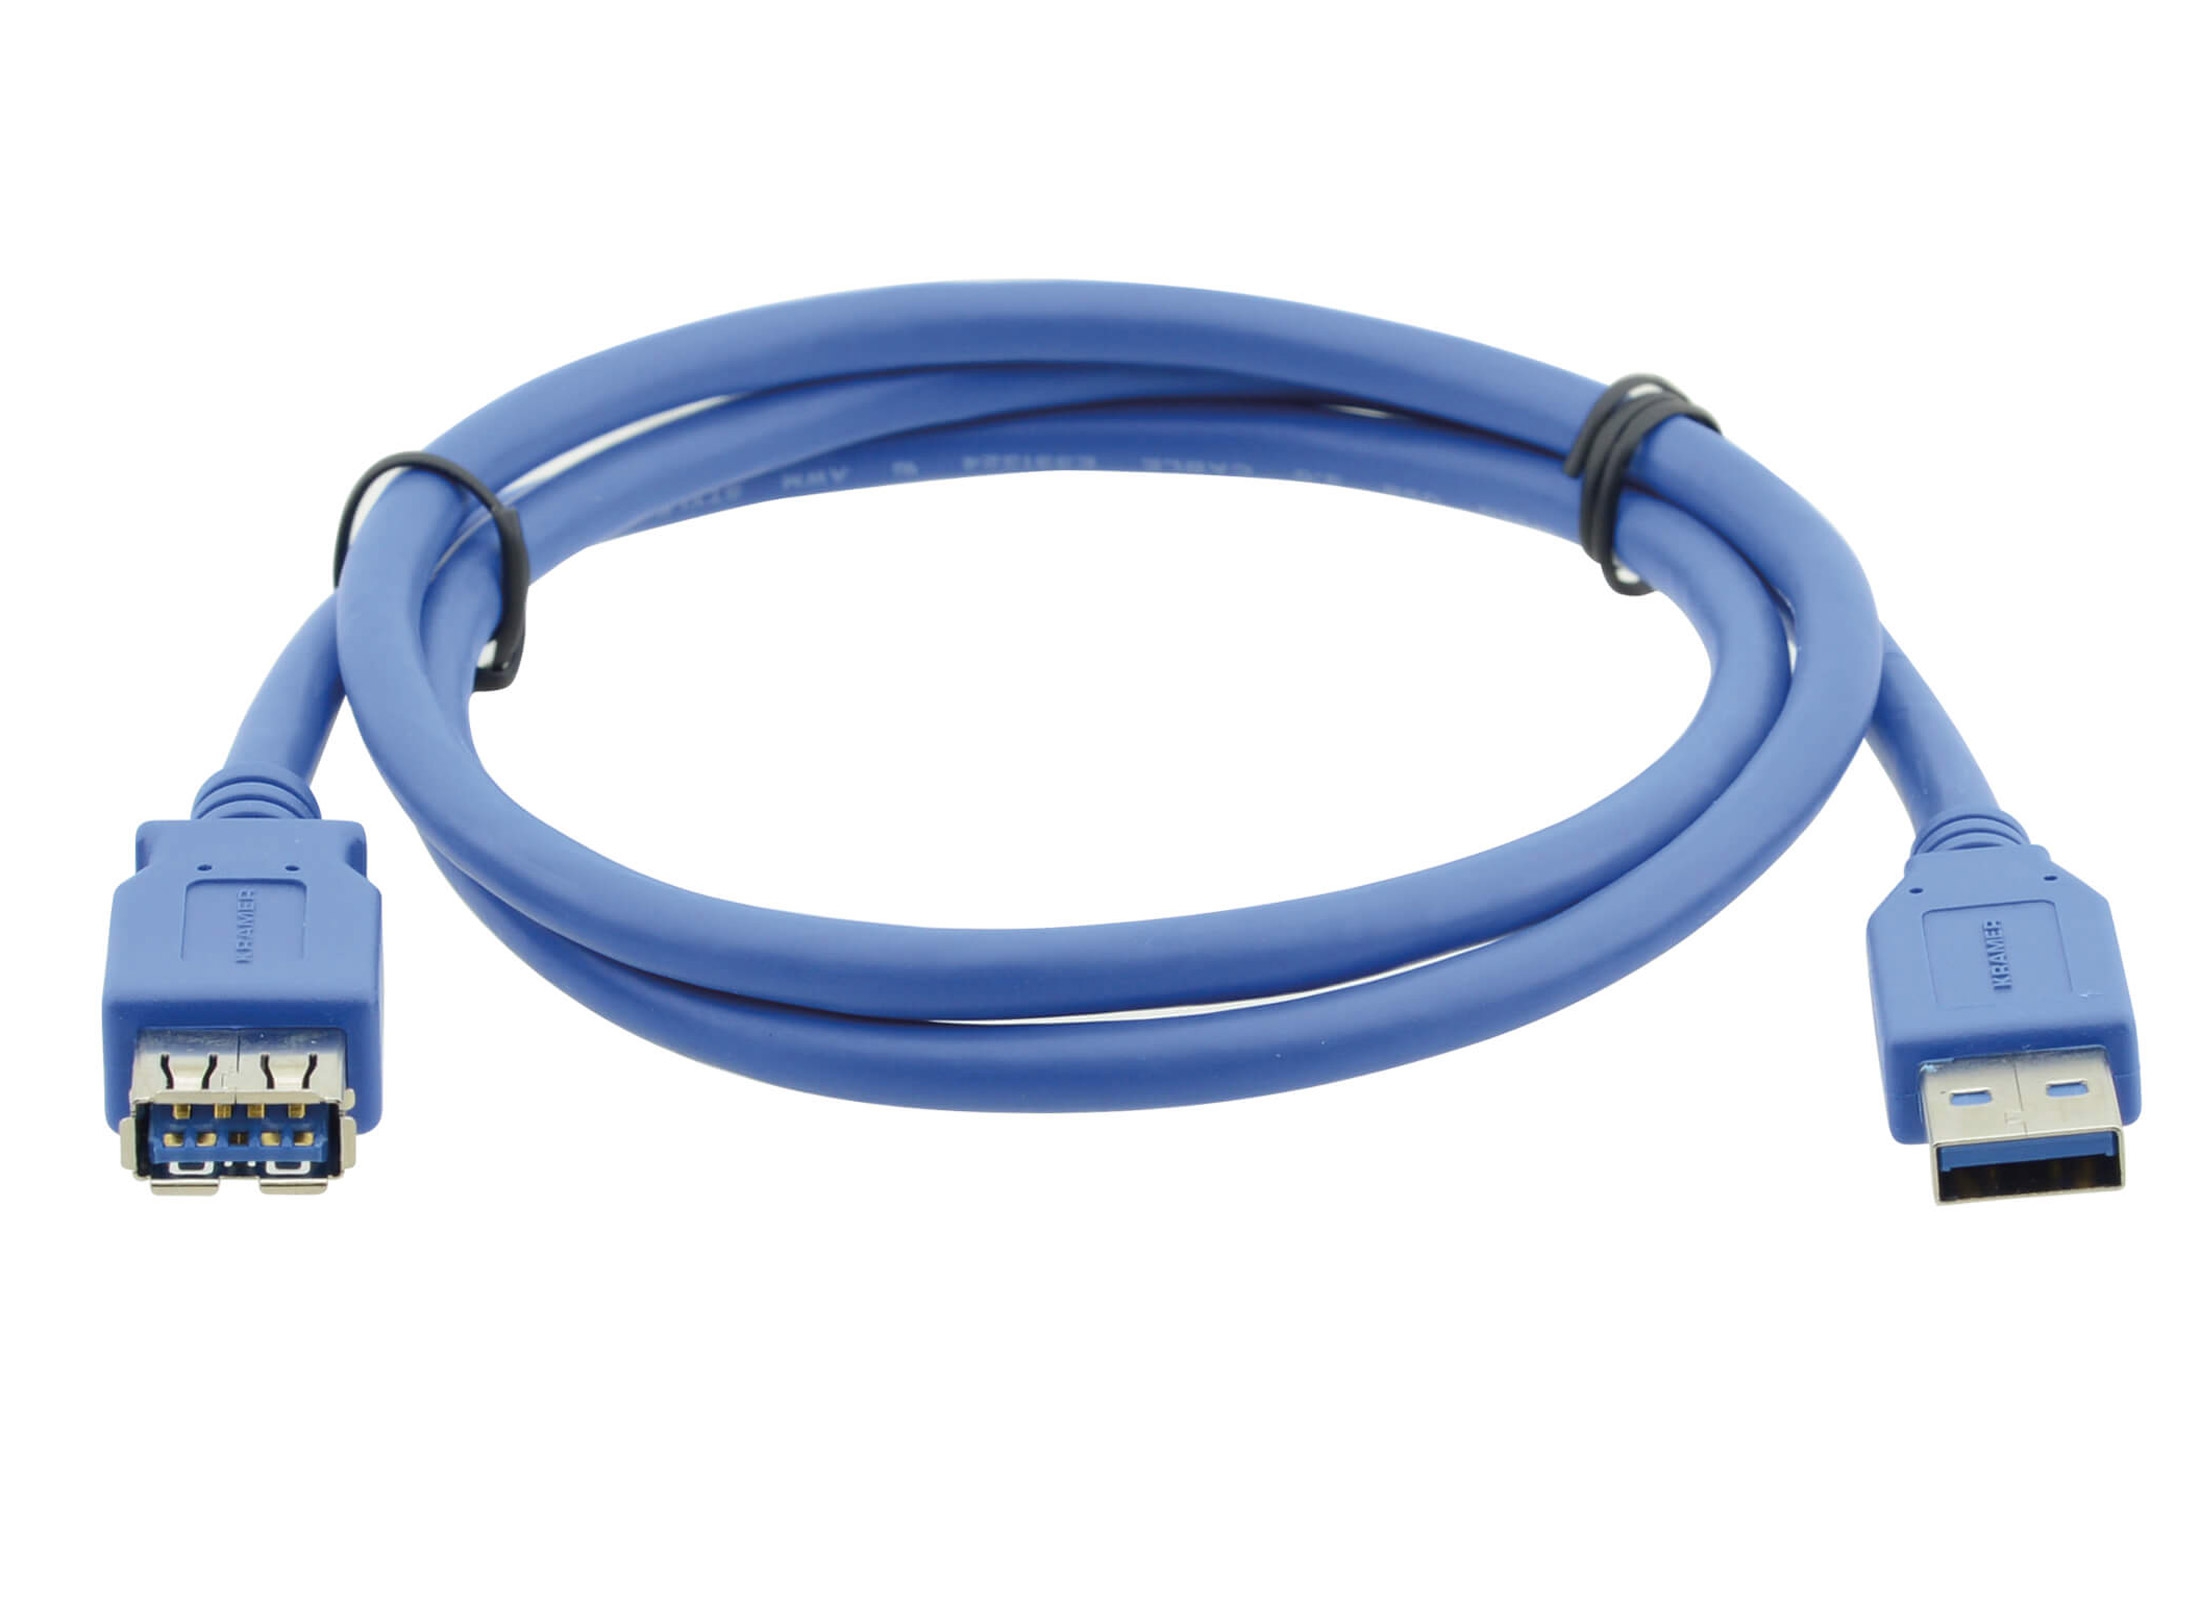 Kramer C-USB3/AAE-3 USB Cable, 0.9m, BLUE Online At Low Prices At ...